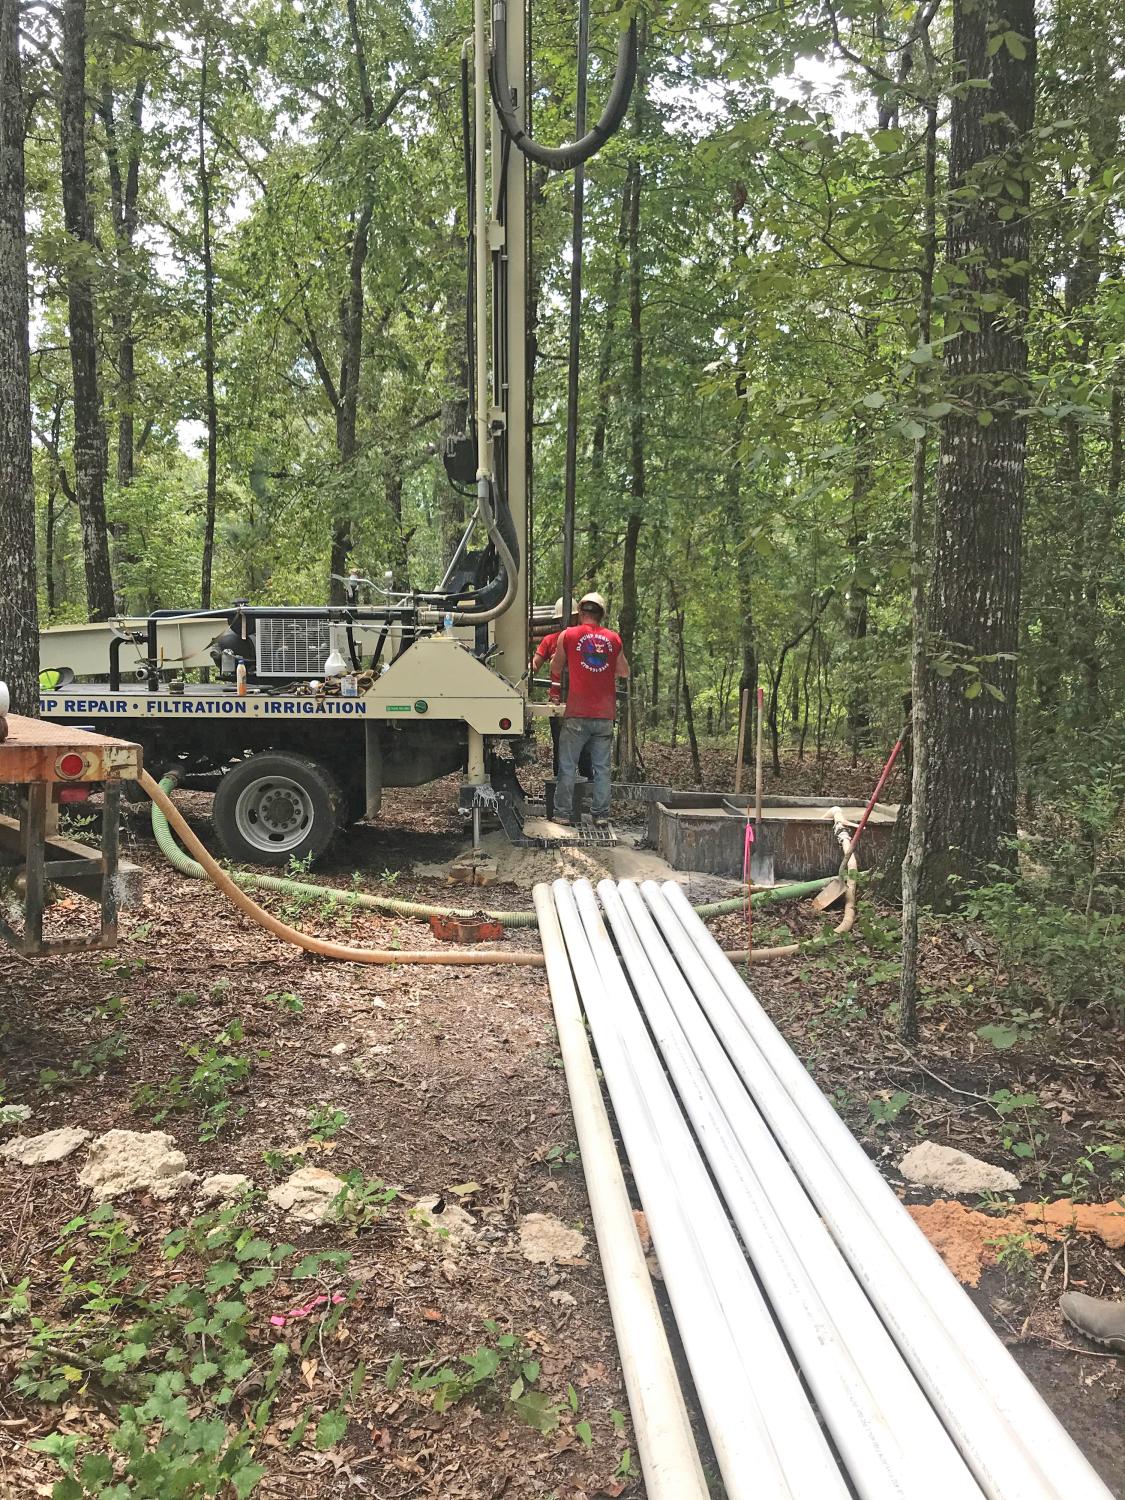 Installing a well with DRILLMAX® DM250 small water well drilling rigs for sale in tough geologies around Knoxville, Georgia.